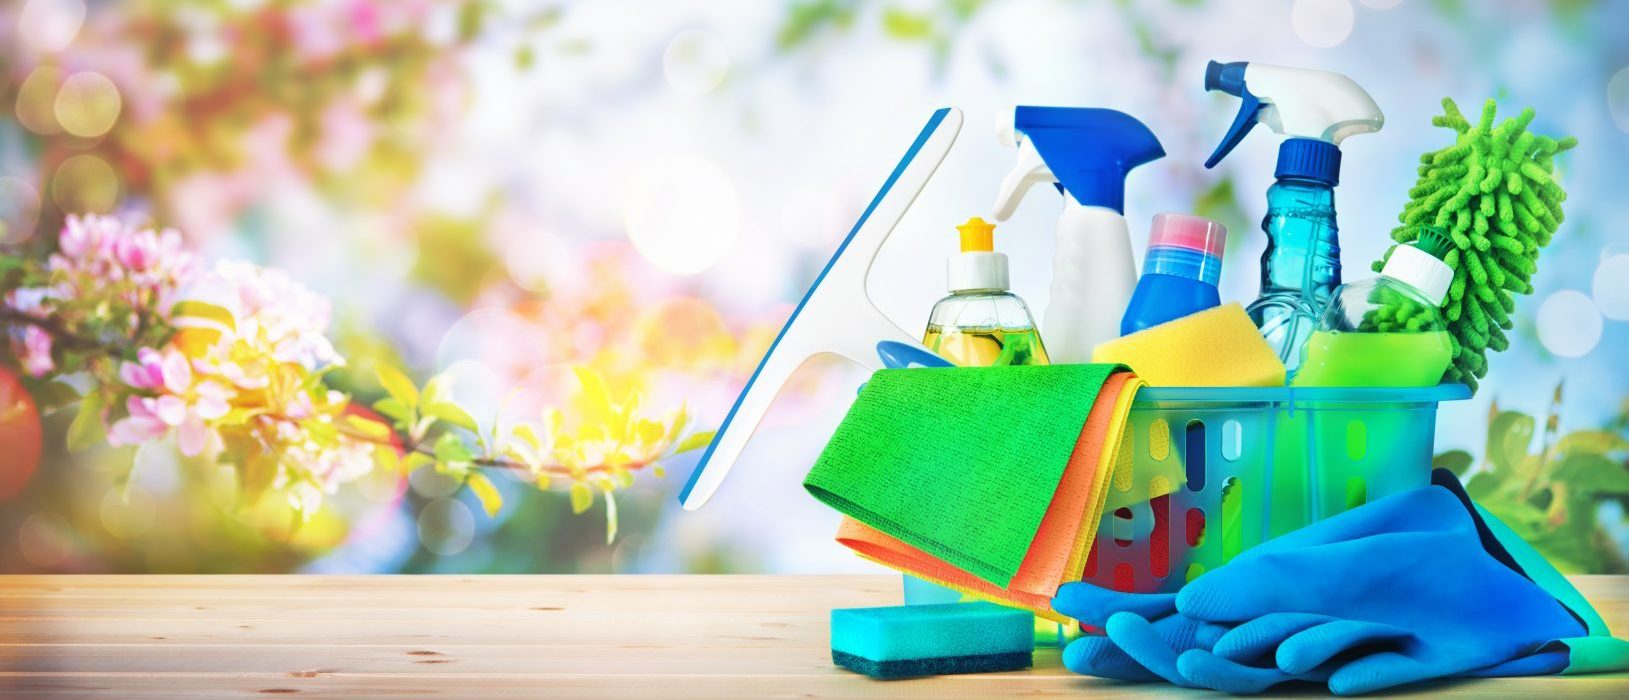 Cleaning concept. Housecleaning, hygiene, spring, chores, cleani